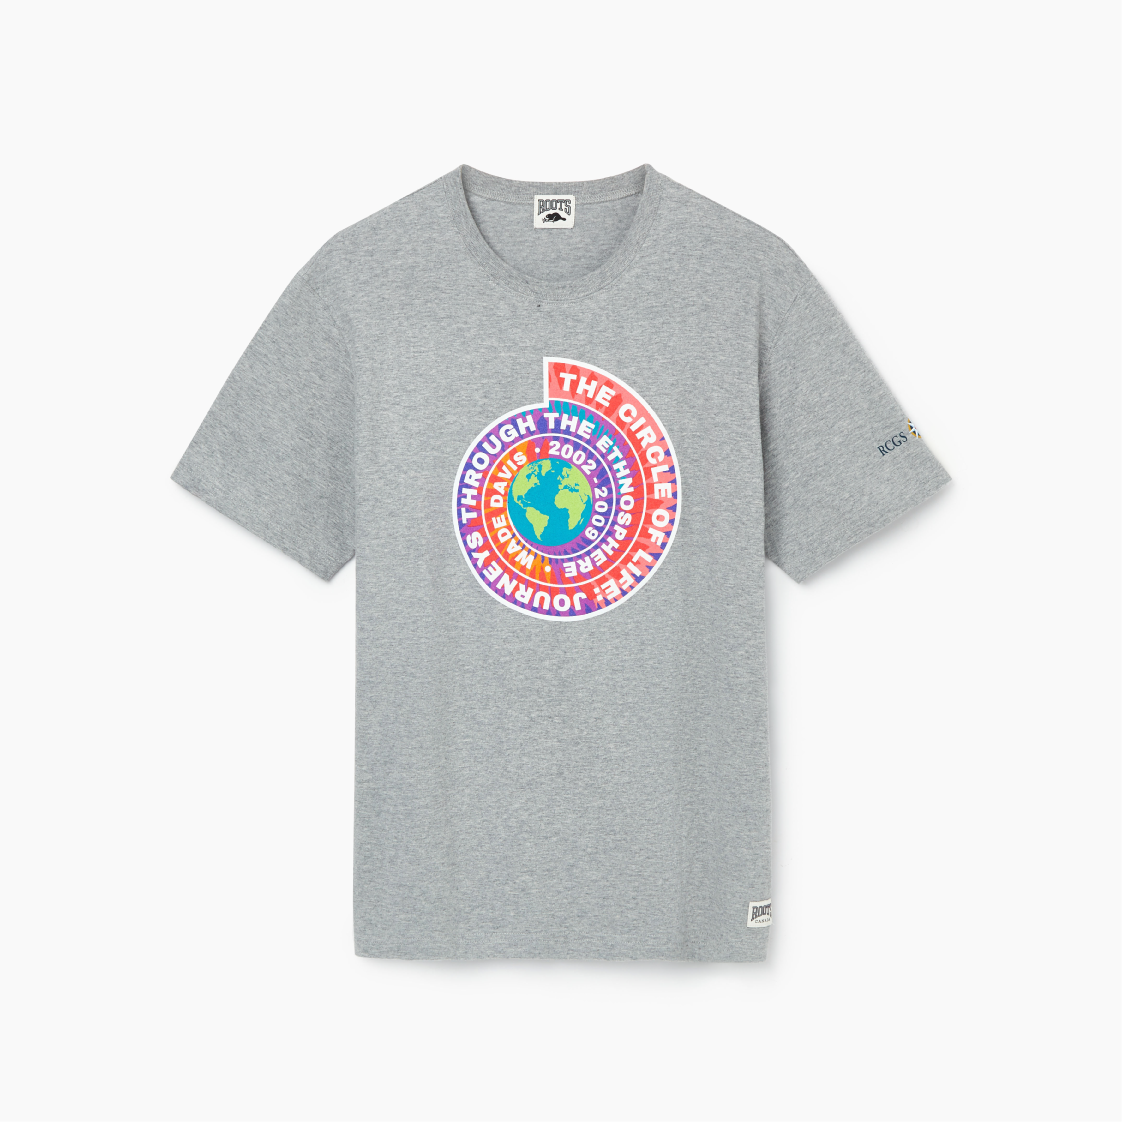 RCGS x Roots Wade Davis expedition t-shirt